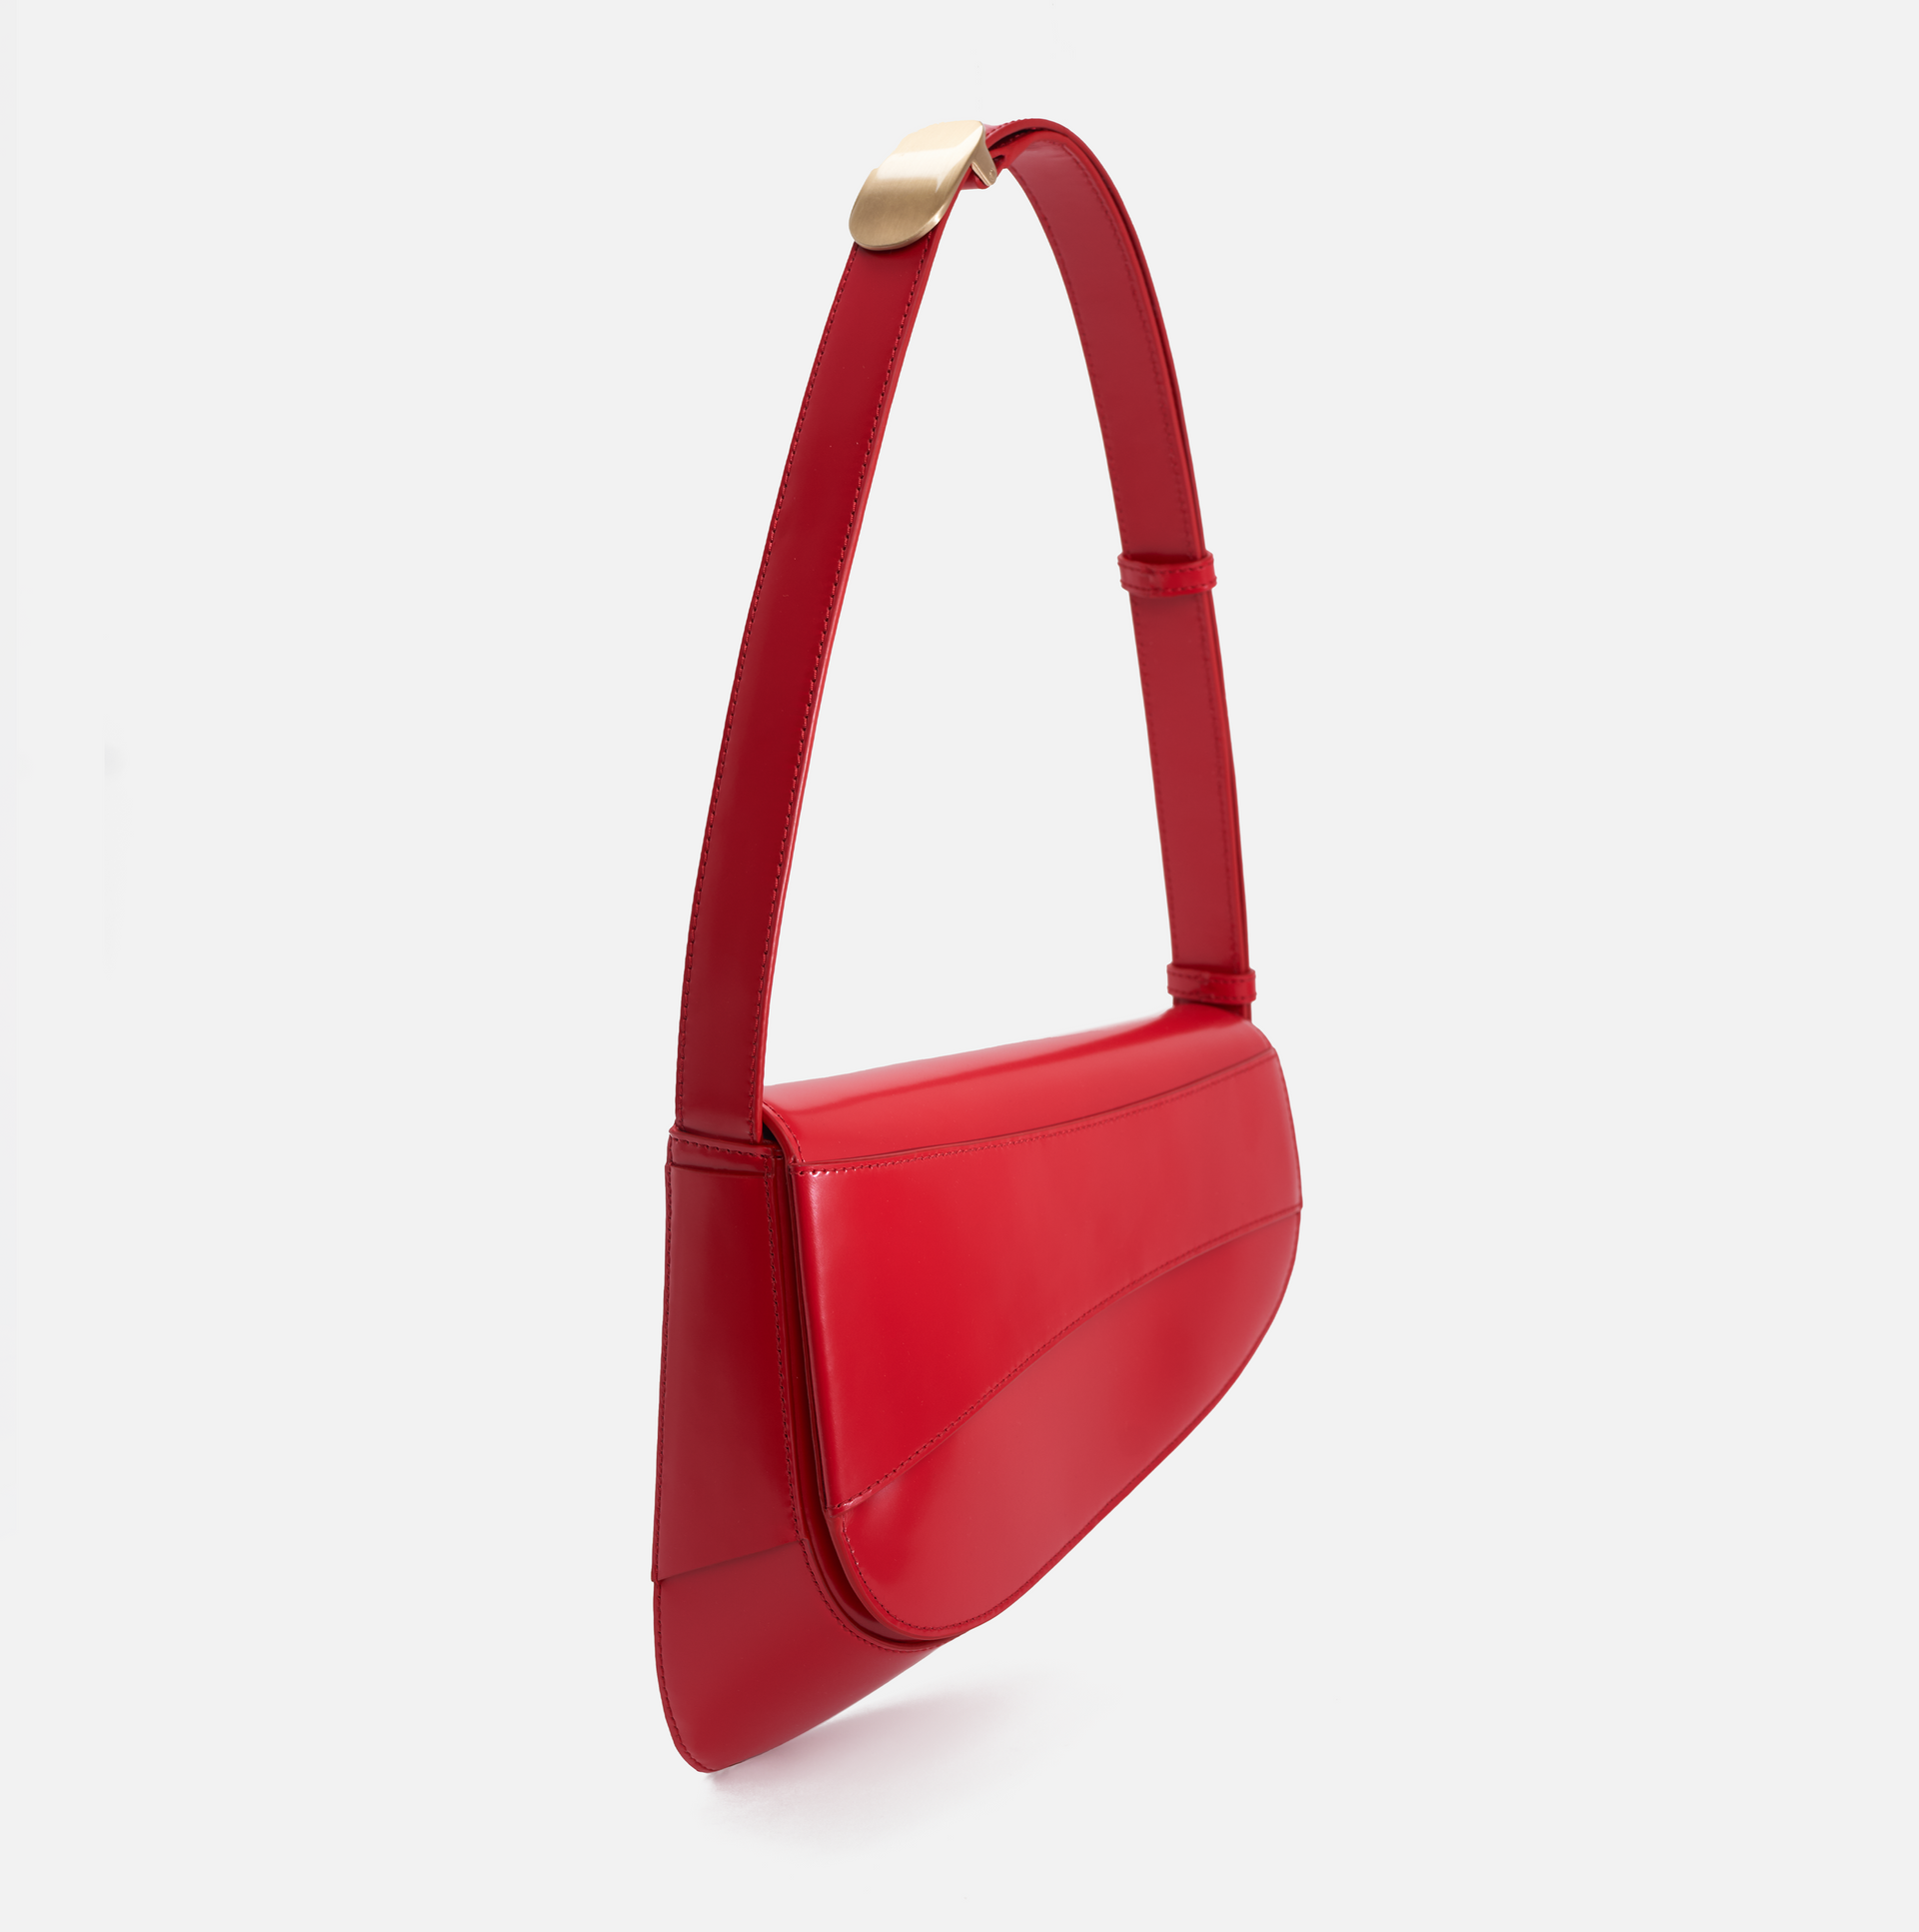 Grete pebble leather shoulder bag in carnelian with red edge paint - ro bags